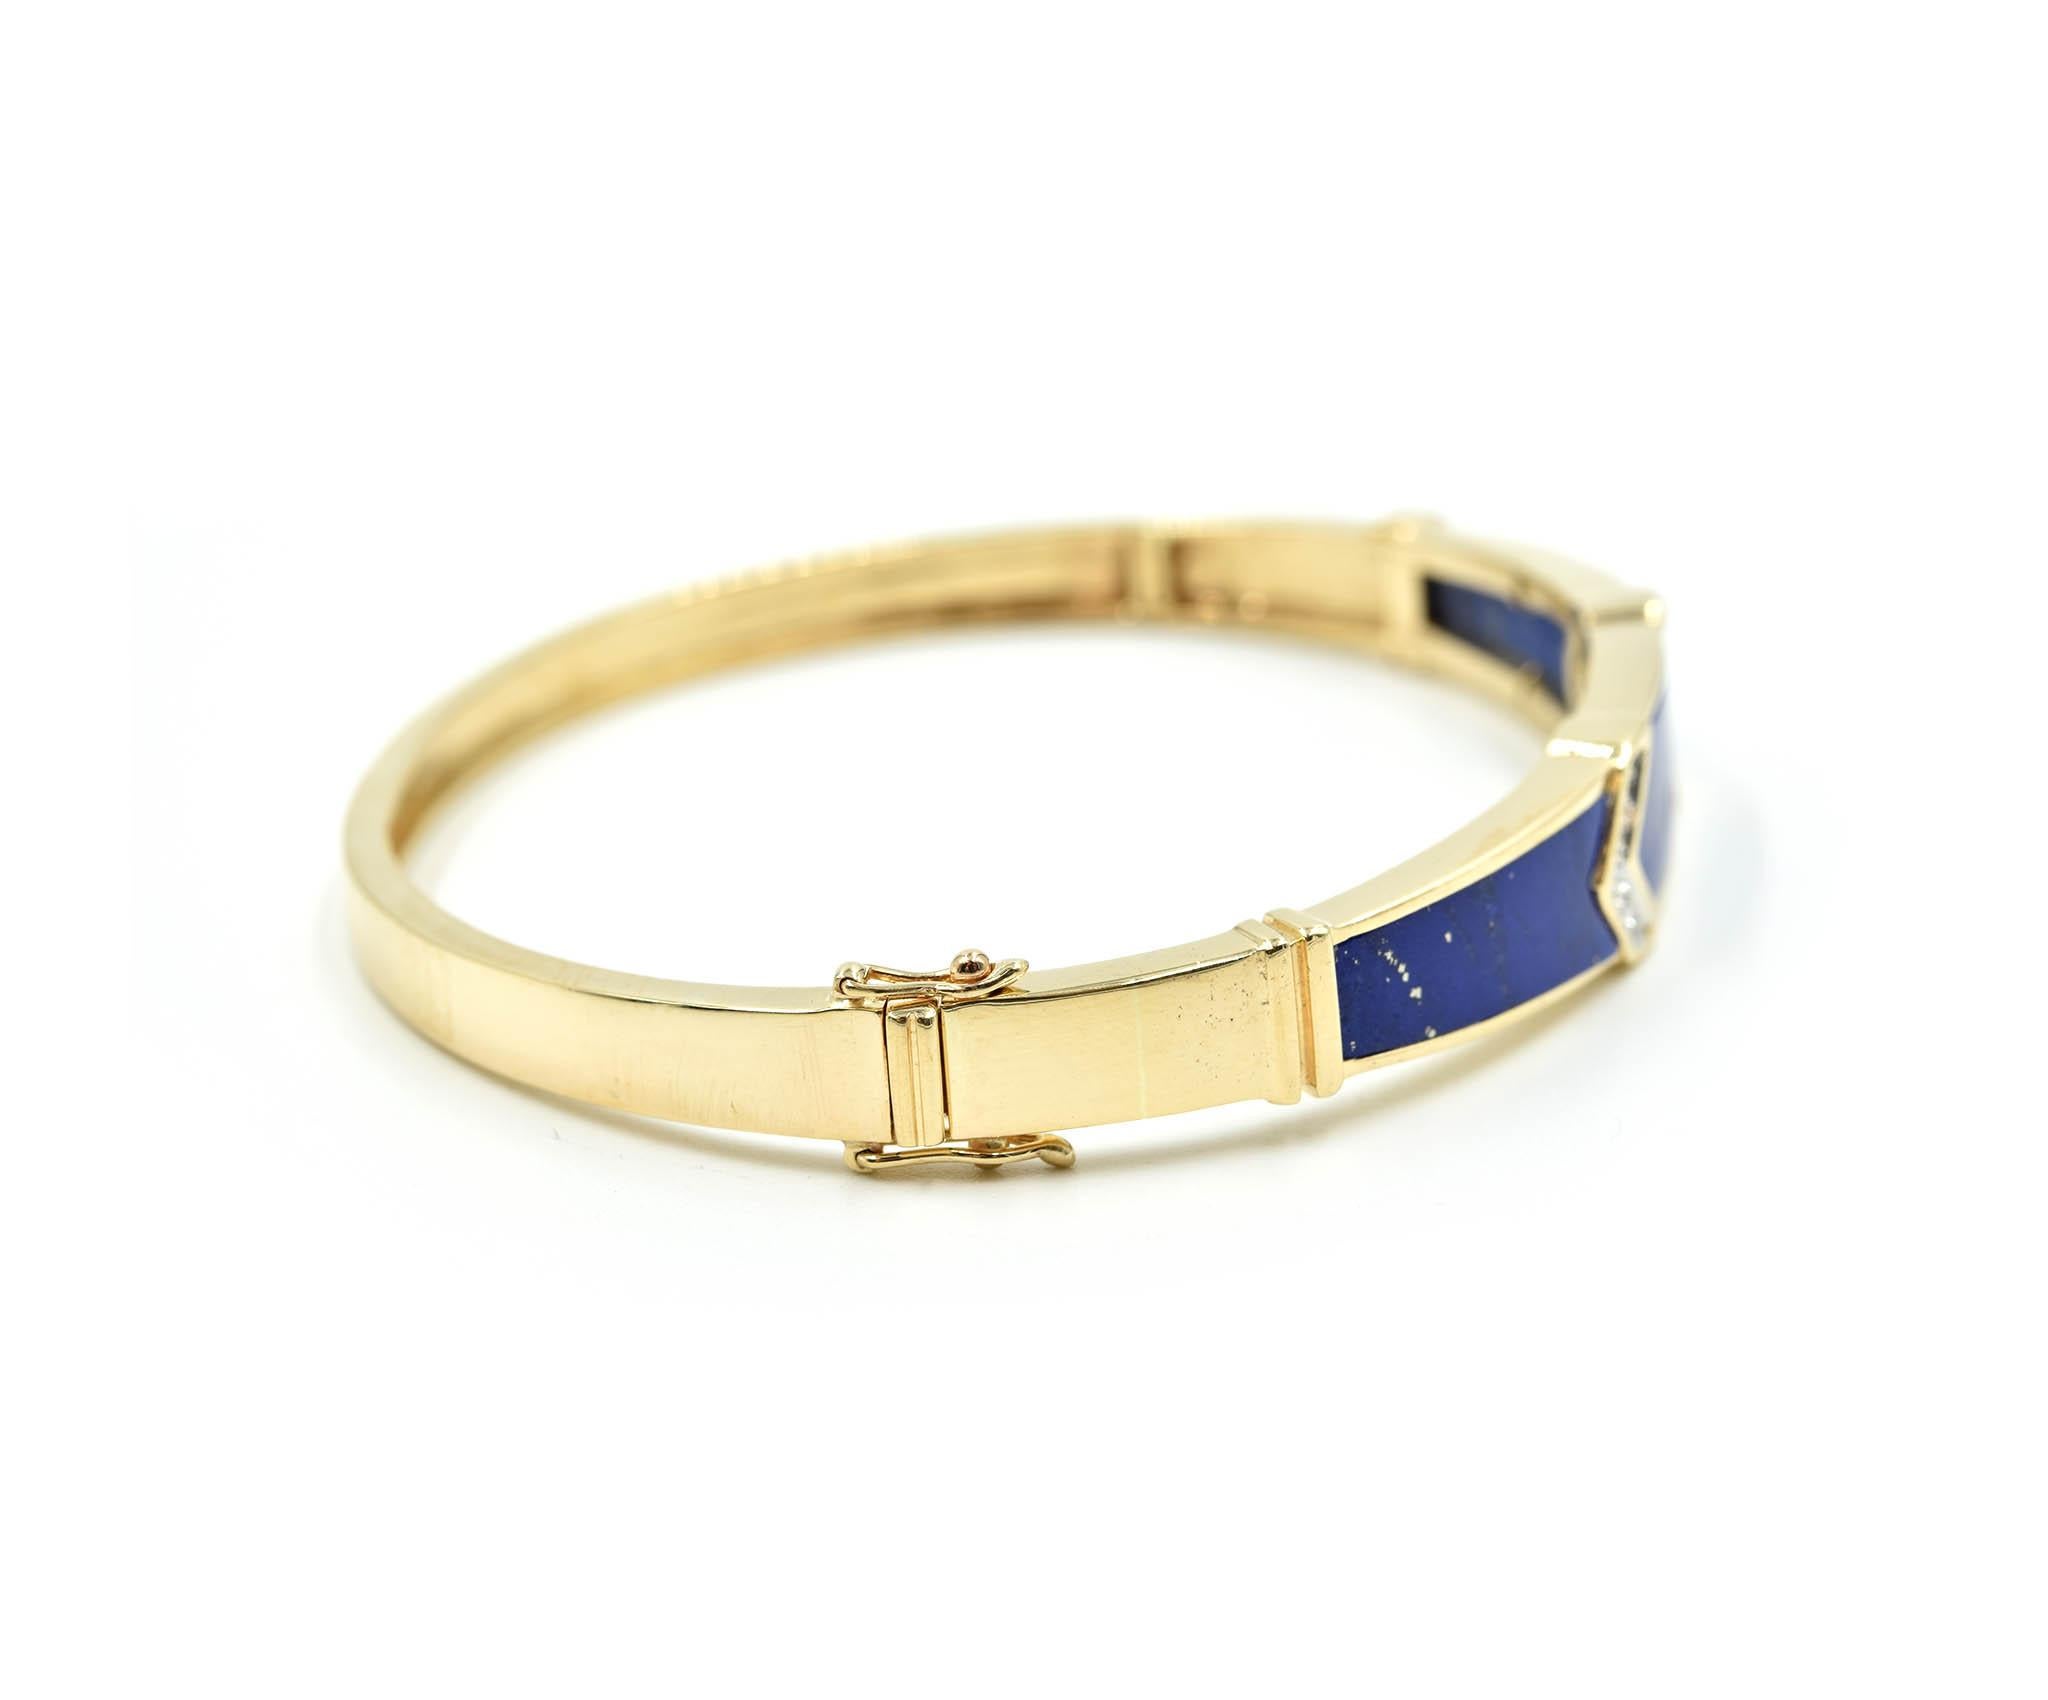 Designer: custom design
Material: lapis lazuli and 14k yellow gold
Diamonds: 10 round cuts = 0.05 carat total weight
Dimensions: bangle will fit up to a 6 ½ inch wrist and is ½ an inch wide
Weight: 18.47 grams
